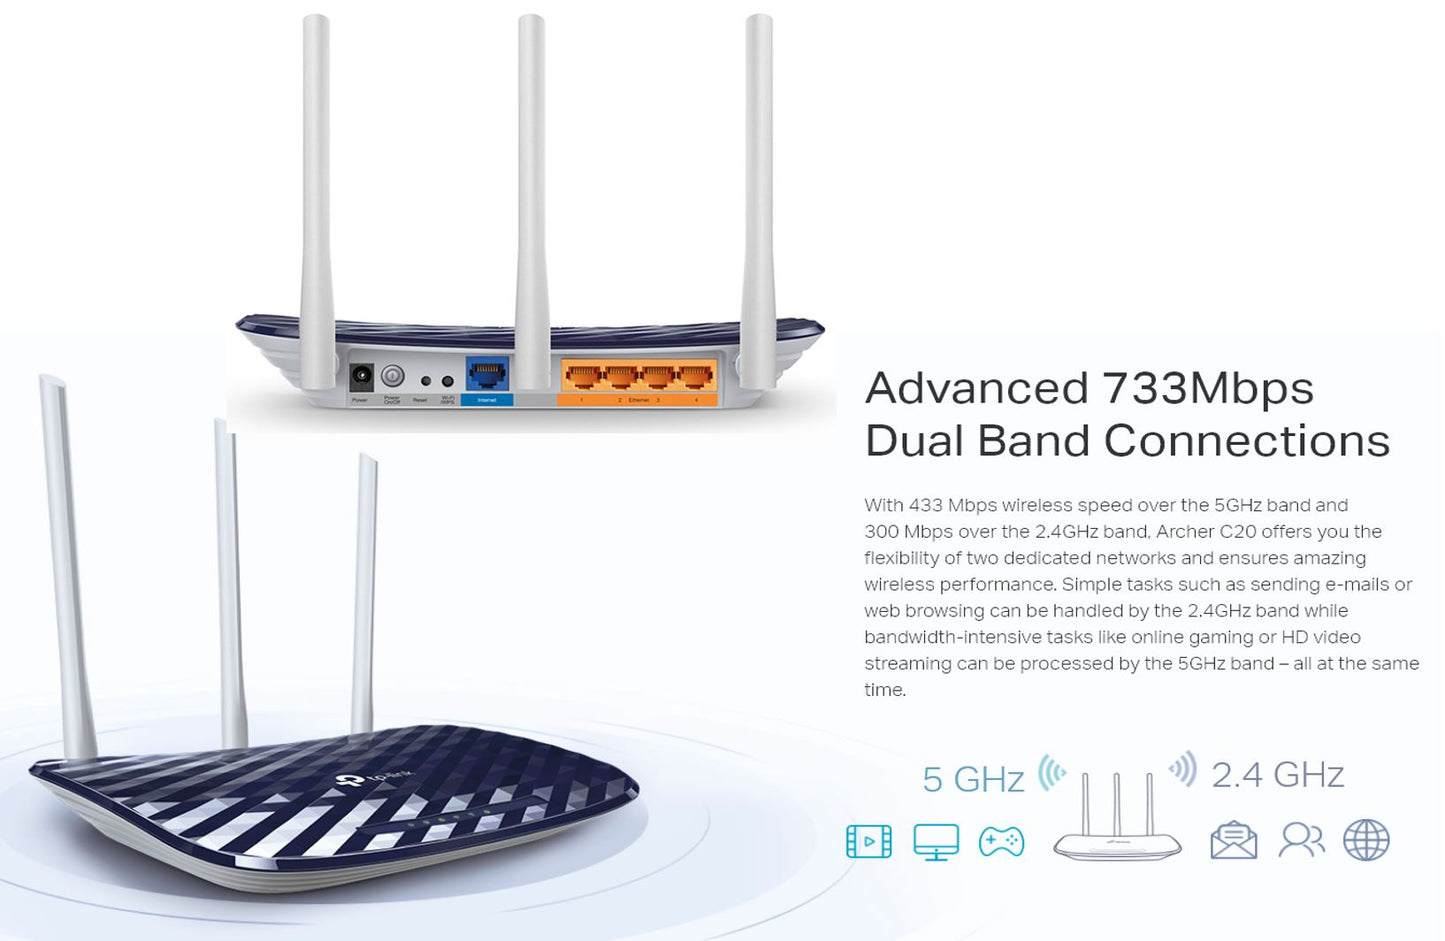 TP-Link Archer C20 AC750 Wireless Dual Band Route